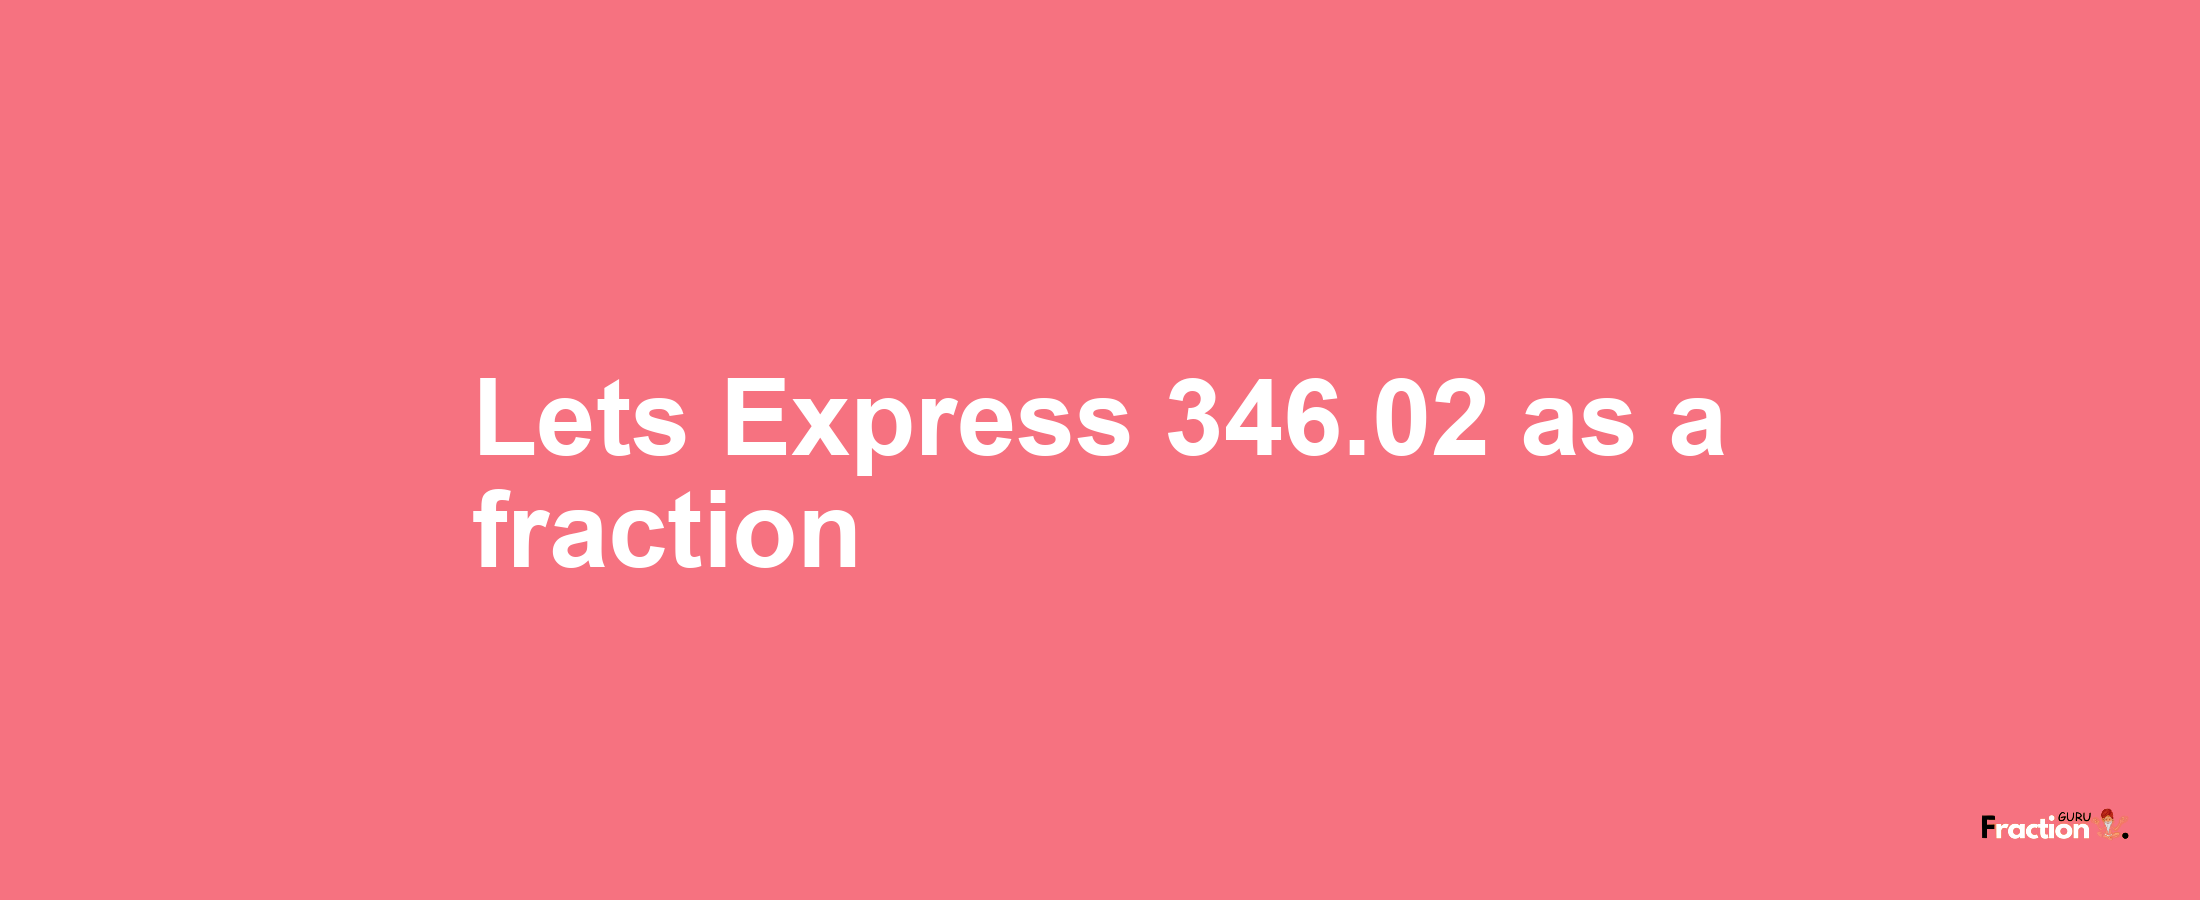 Lets Express 346.02 as afraction